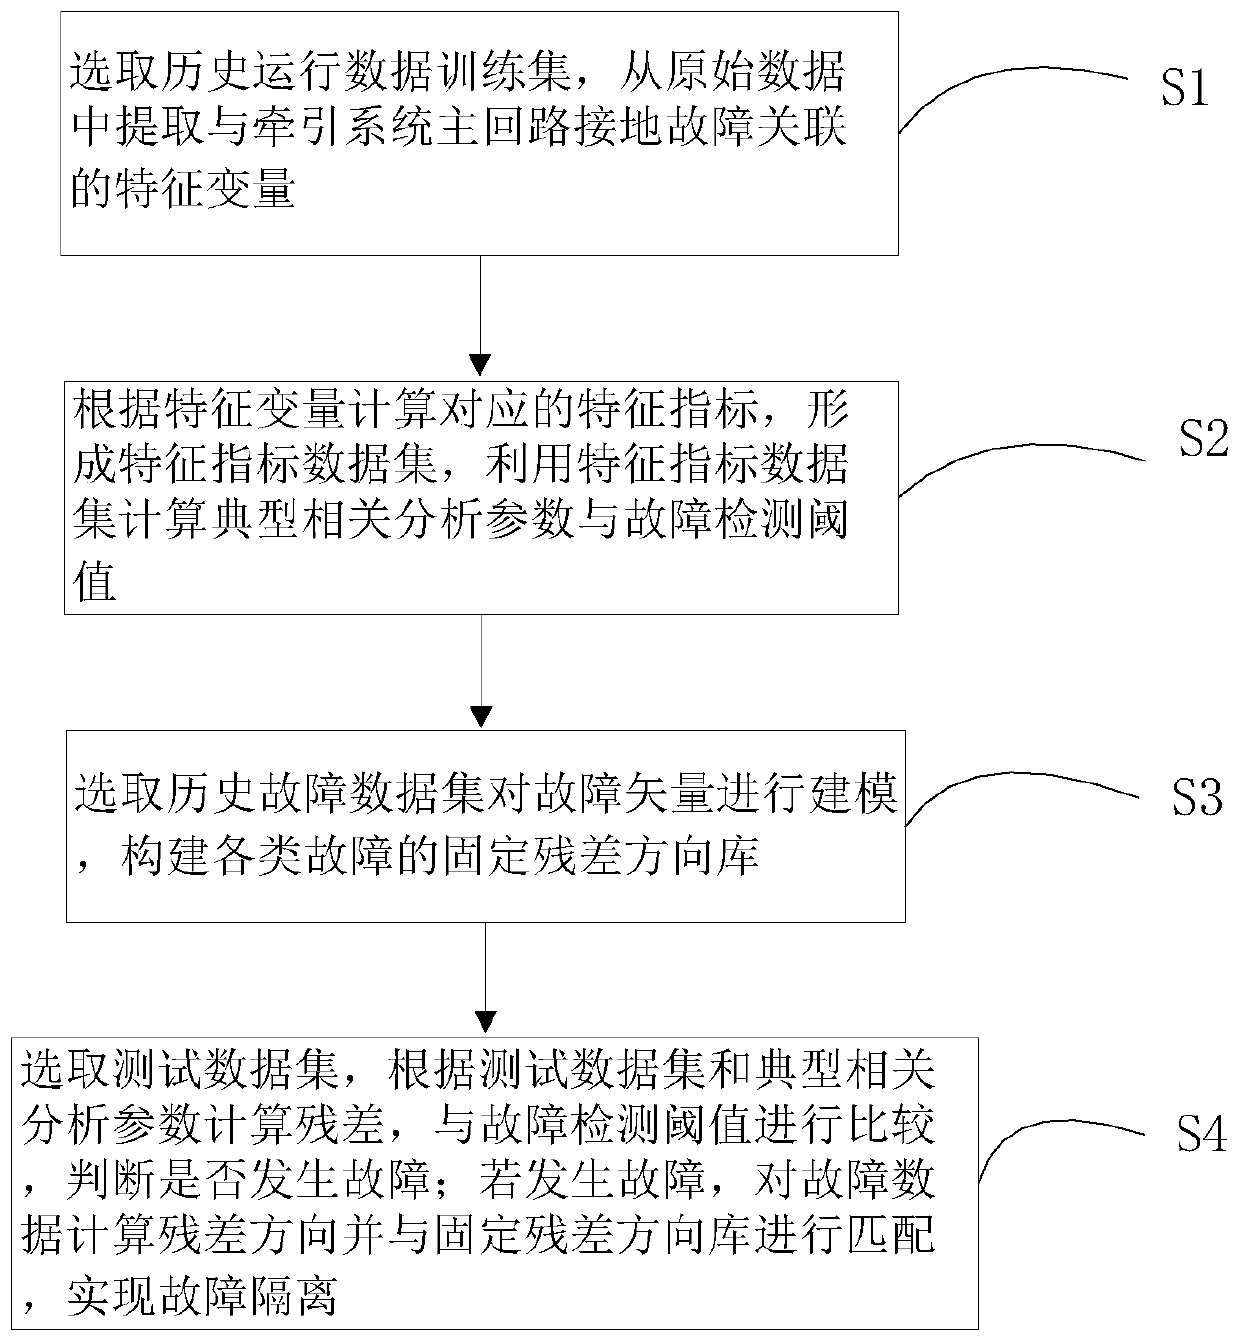 Traction system main loop grounding fault diagnosis method and system based on characteristic correlation